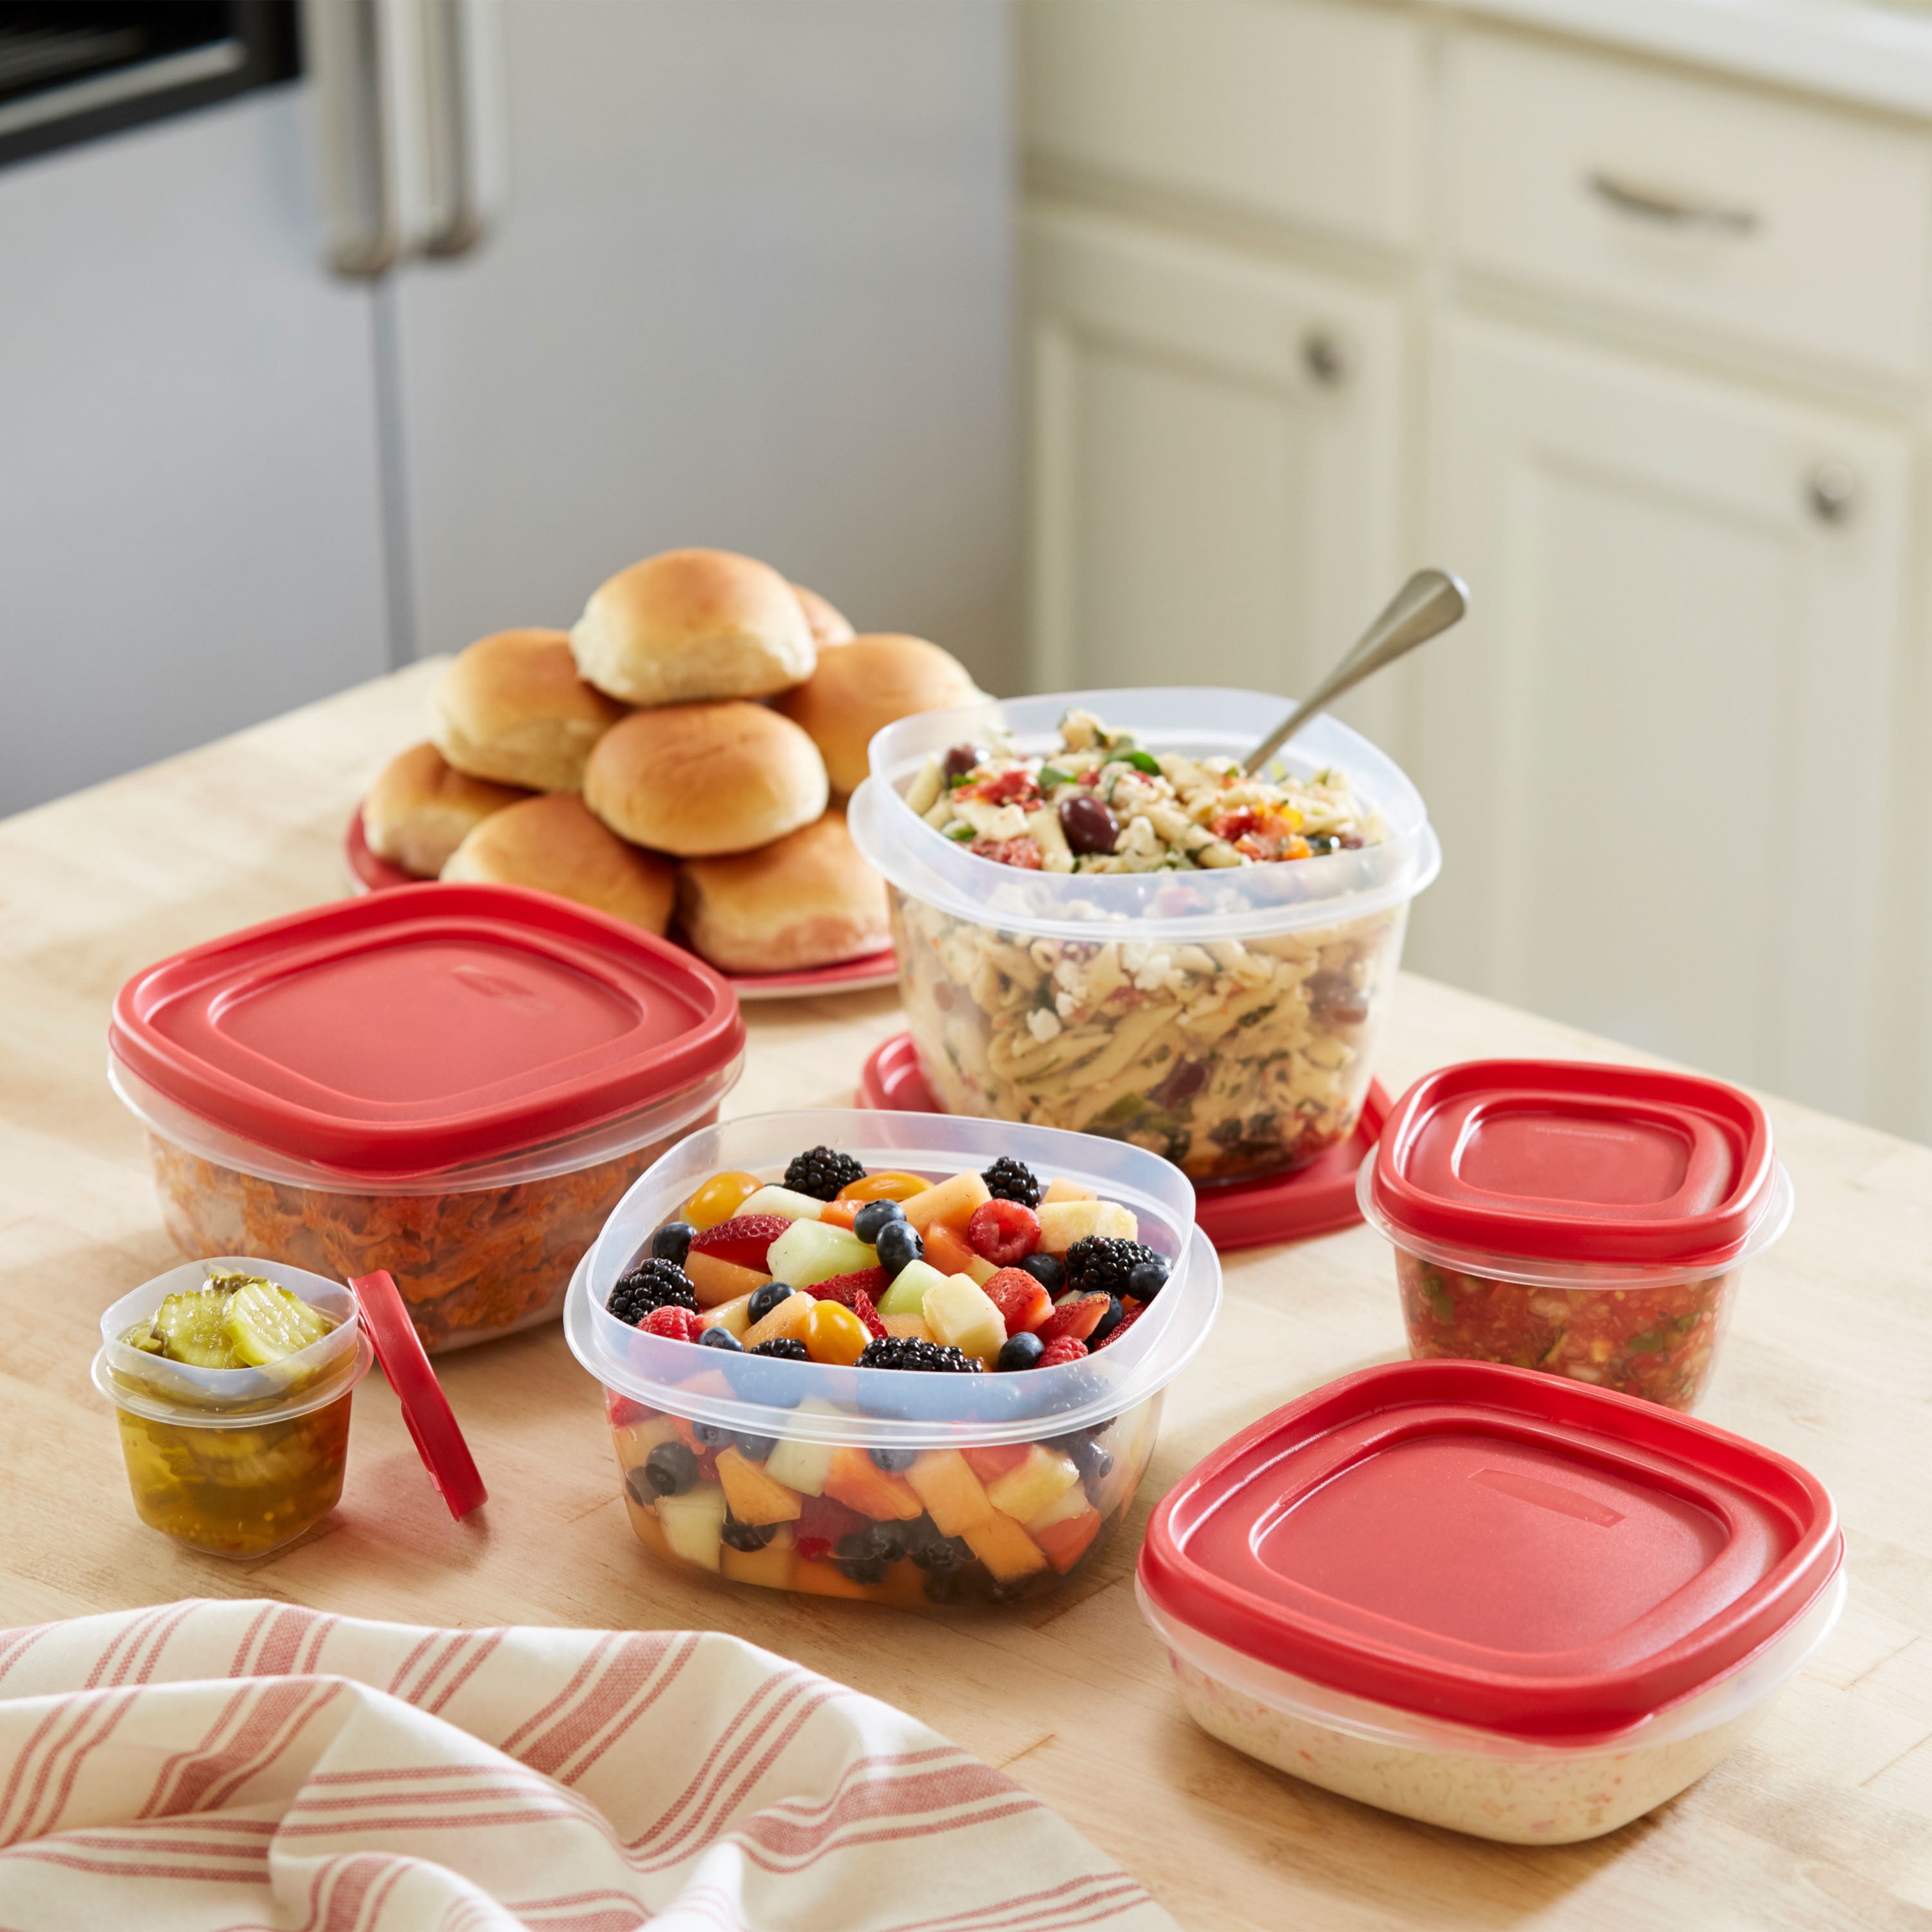 Rubbermaid Storage Containers, Easy Find Lids, Teal, 3 cup, Flex & Seal,  Leak Proof Lids, Food Storage Set, Clear Meal Prep Flex Containers, 3 Piece